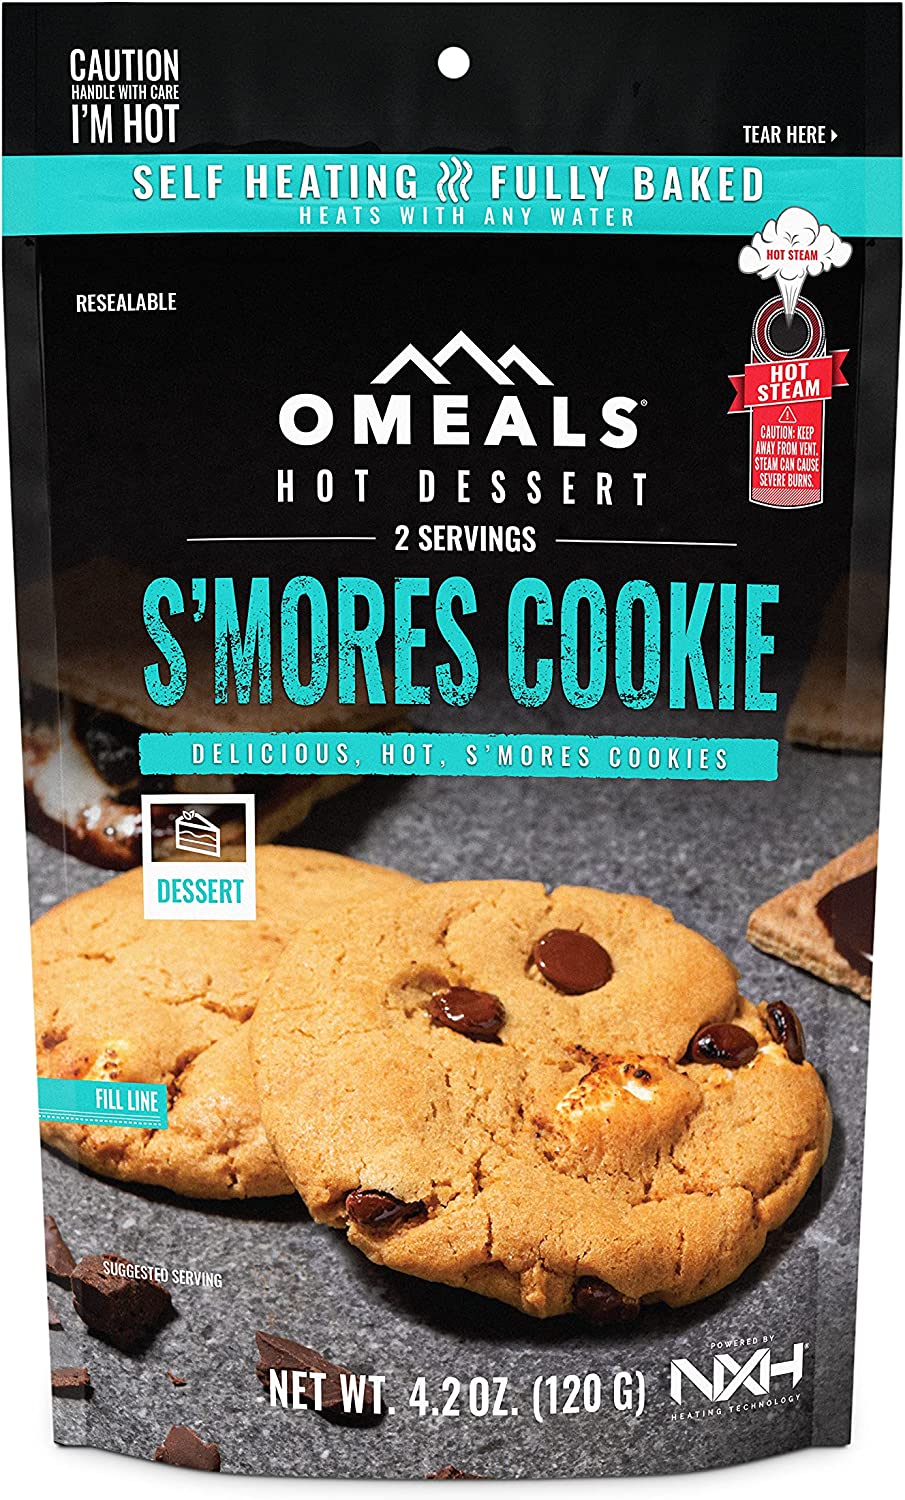 OMEALS S’Mores Cookie Good to Go Meals | Mre Meals Military 2022 Bulk, Self Heating Emergency Food Supplies, Fully Cooked Backpacking Meals and Camp Food with Extended Shelf Life | USA | 6 Pack